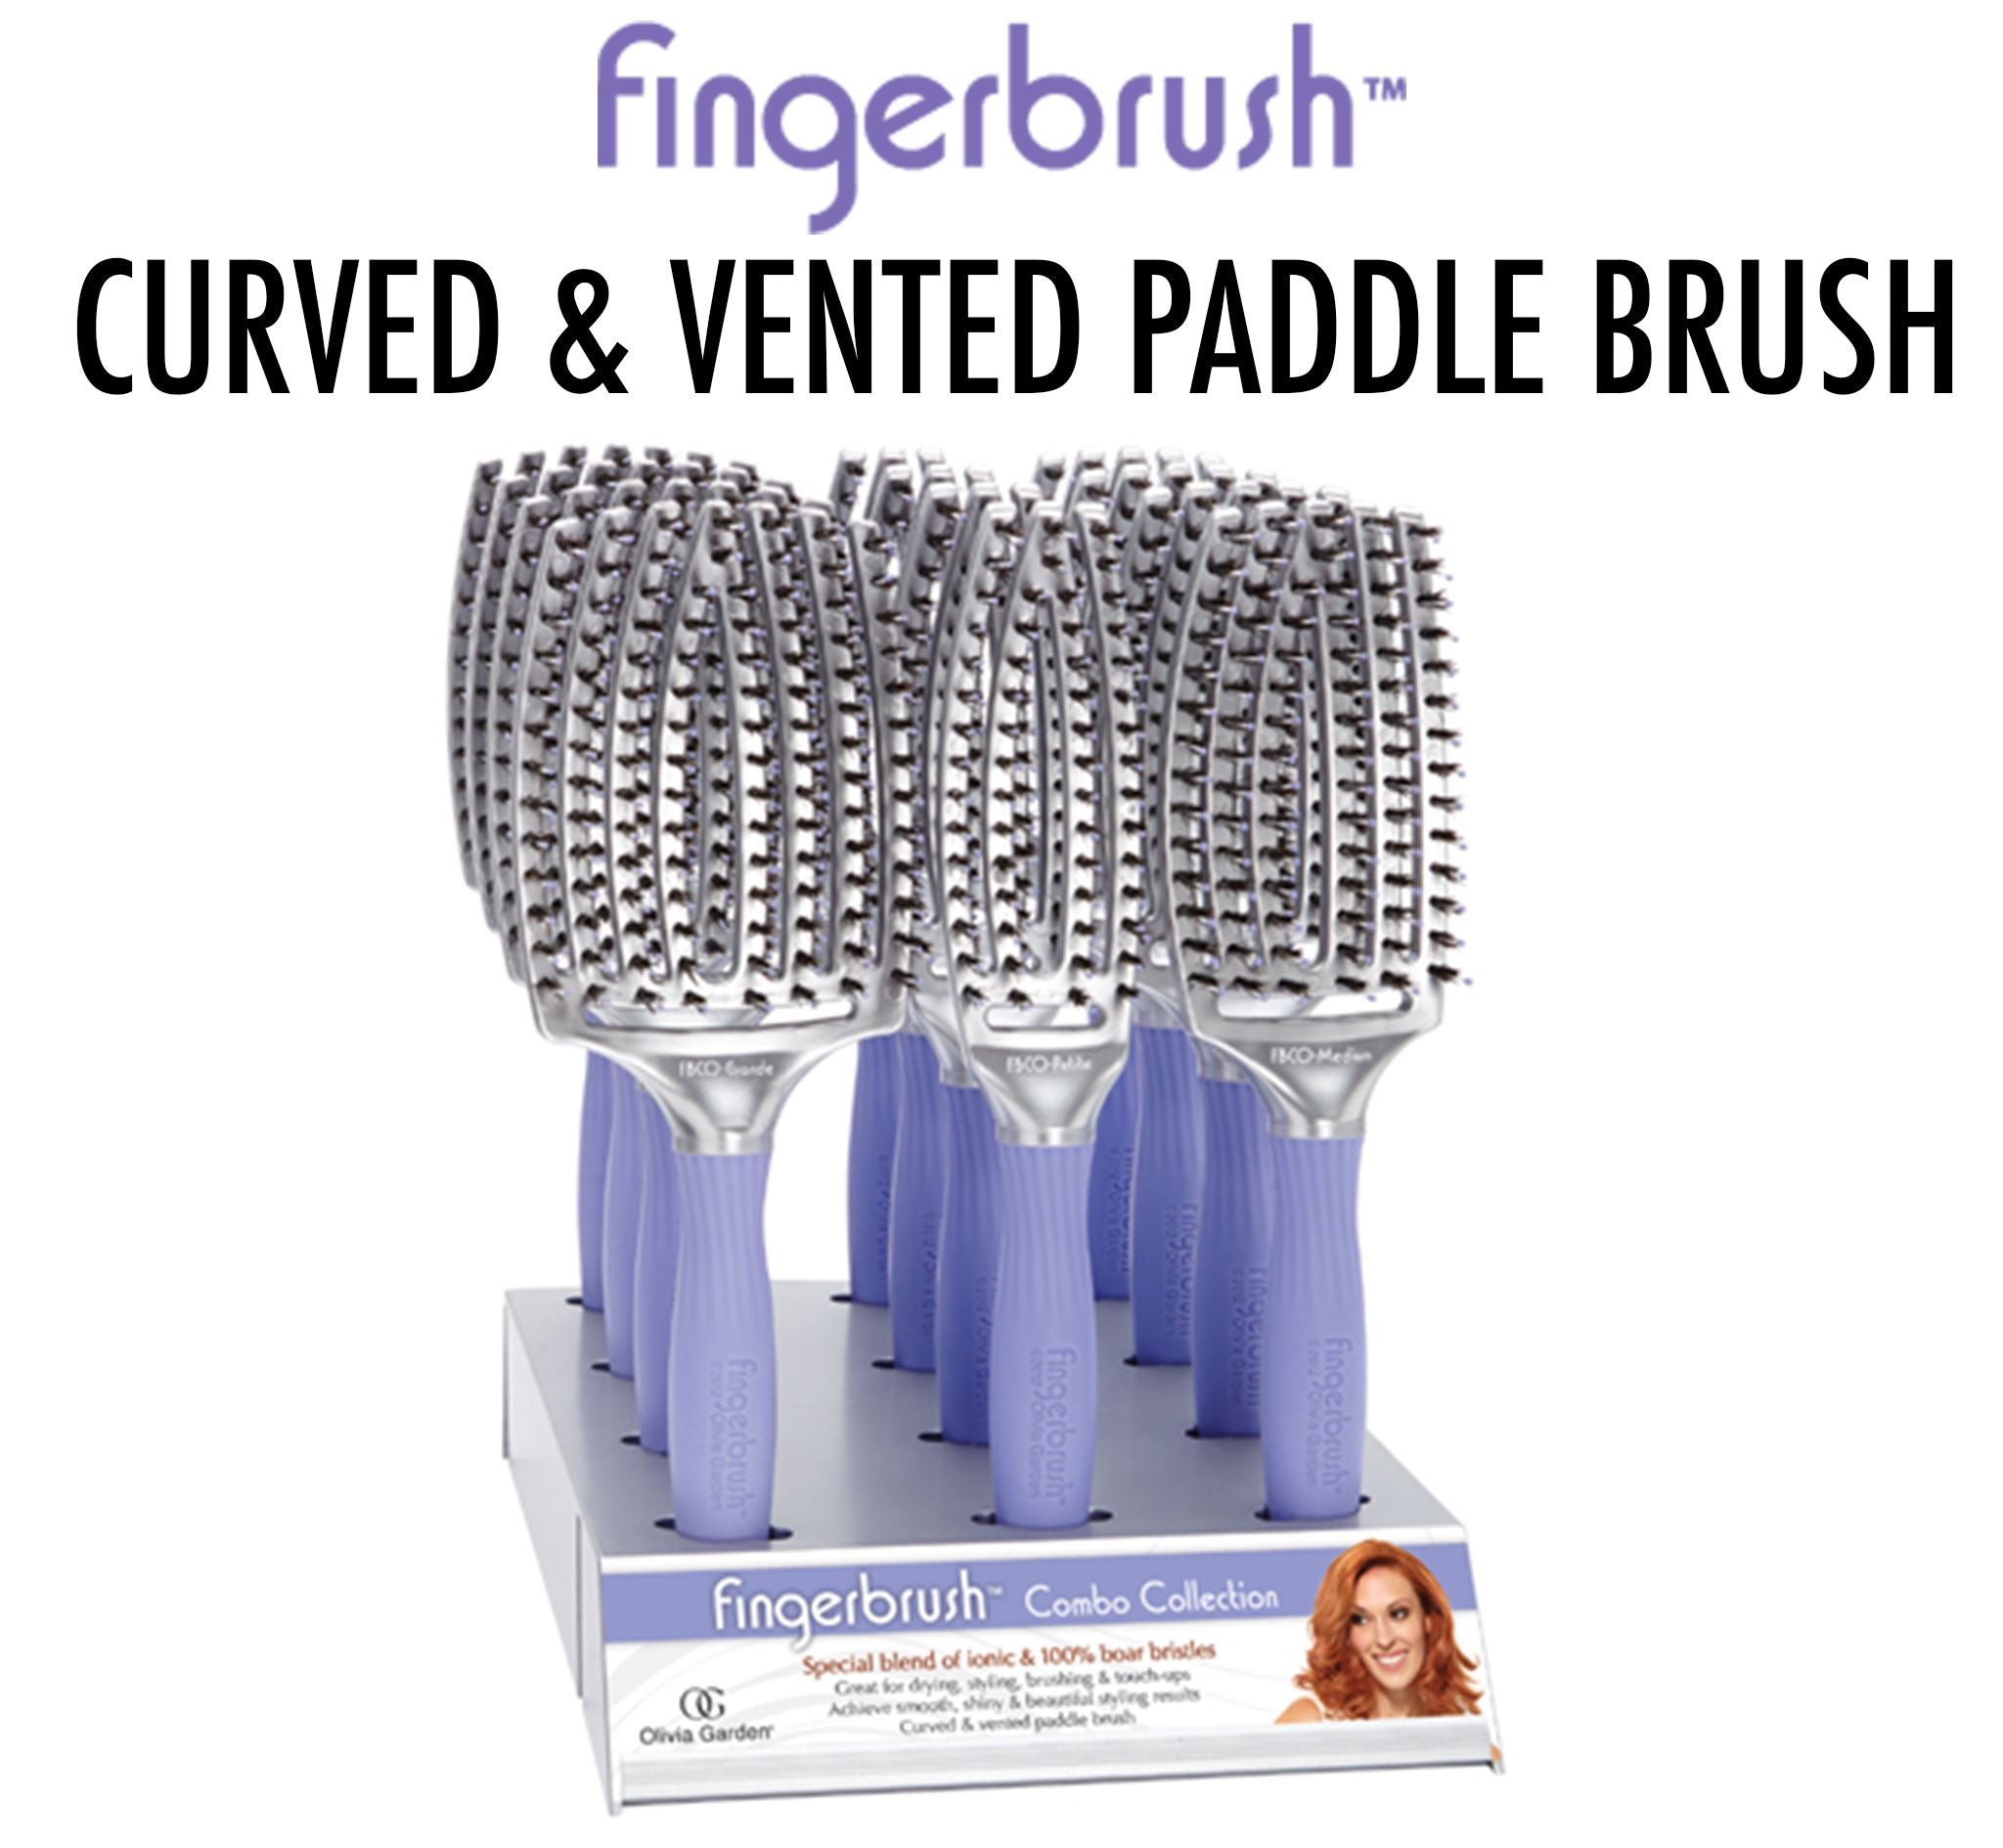 Fingerbrush - Curved & Vented Paddle Brush - SH Salons